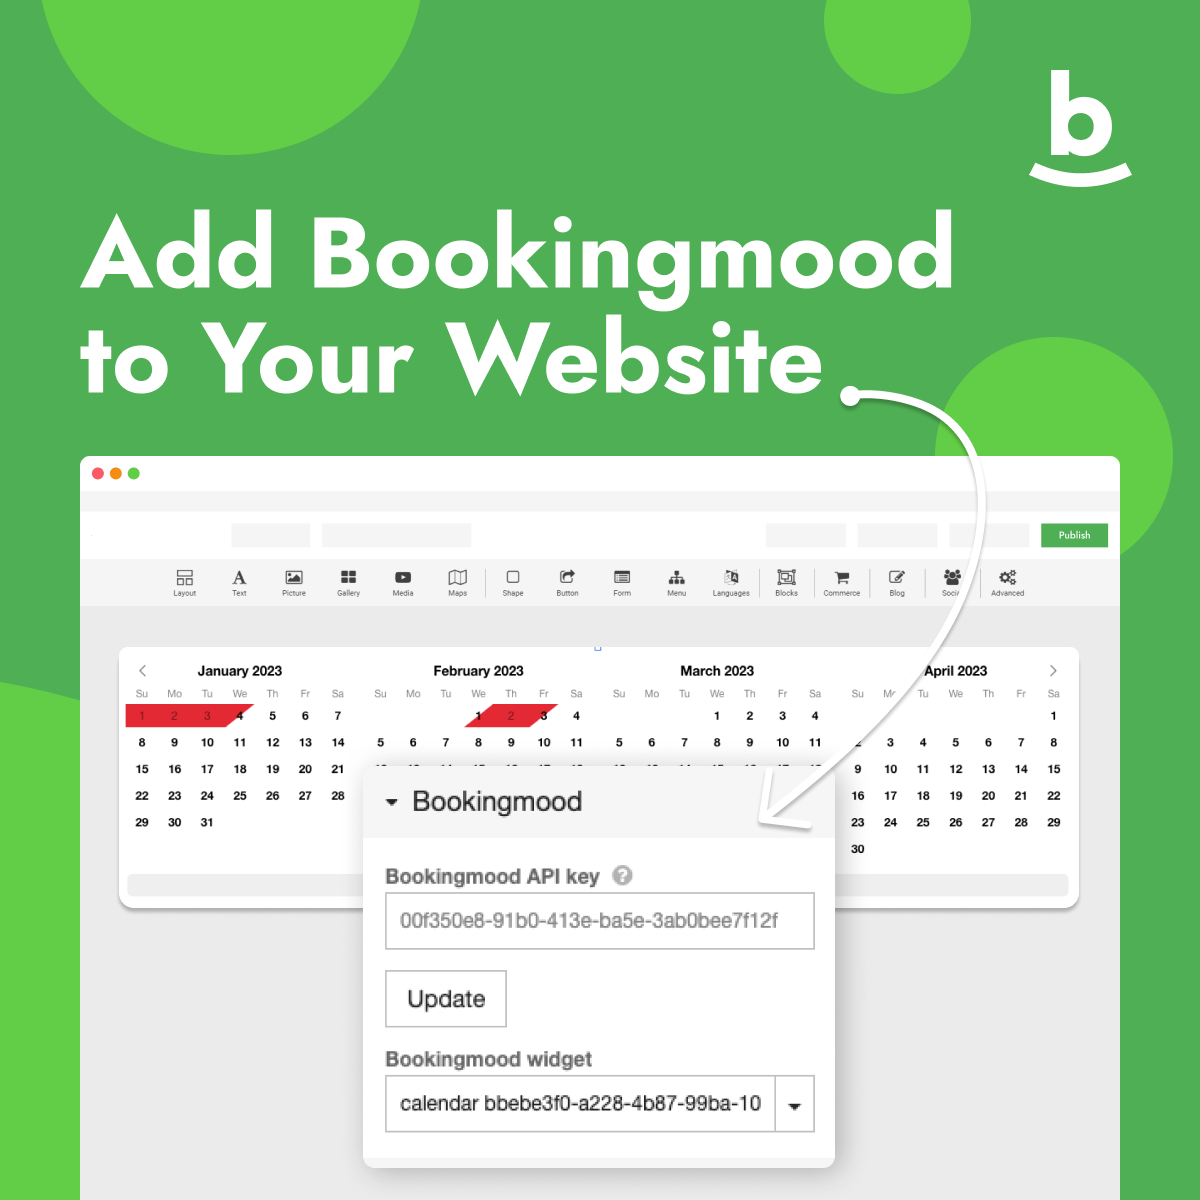 Add Bookingmood to Your Website